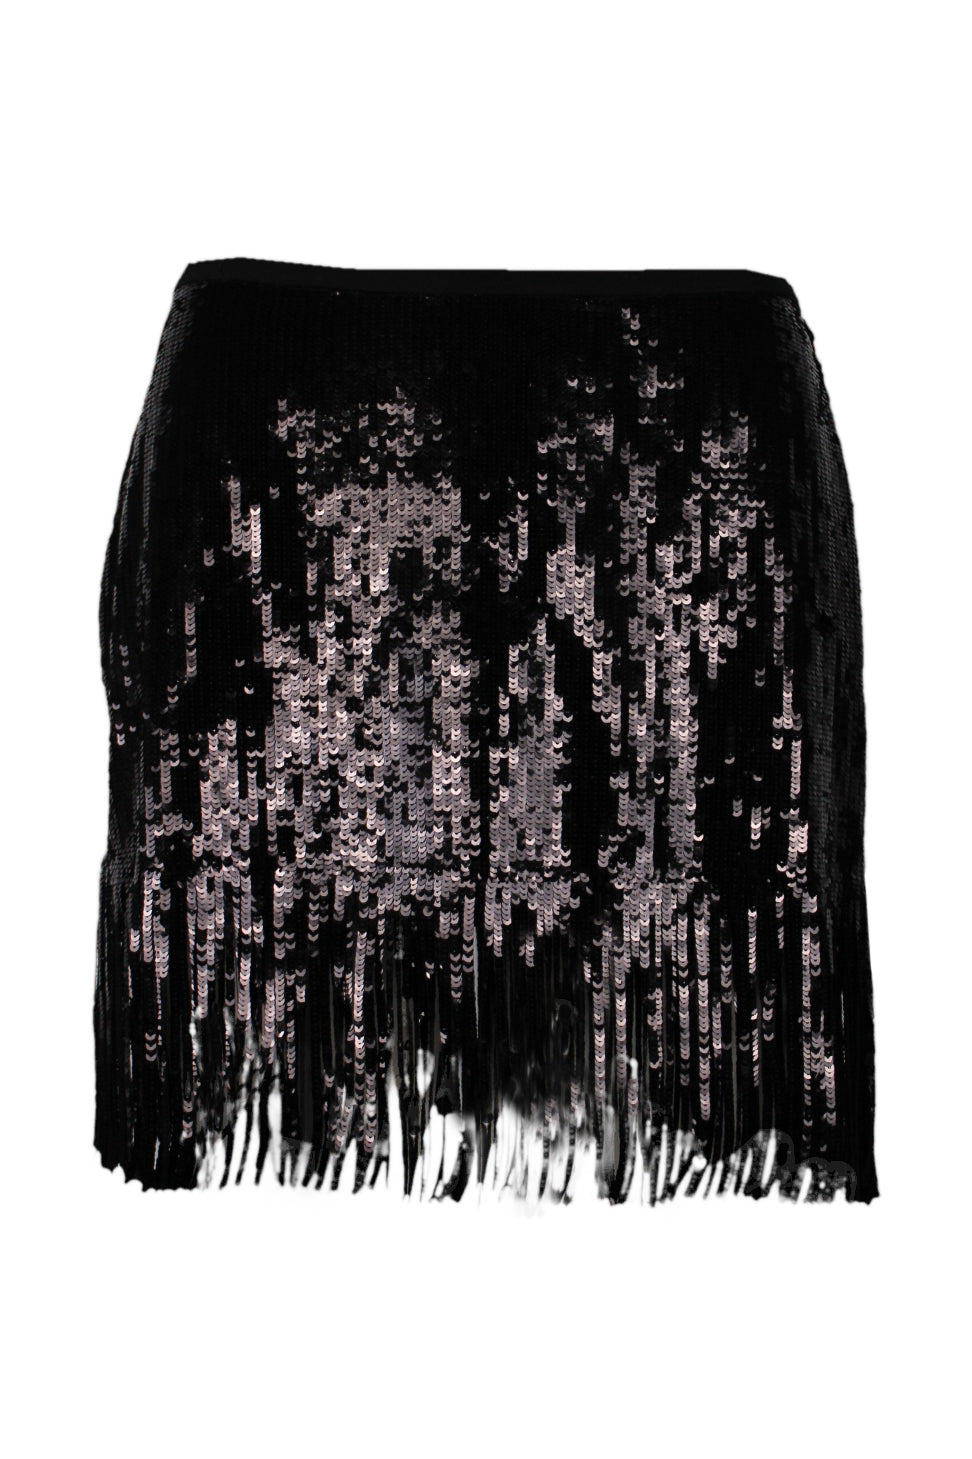 front angle of le superbe black sequin fringe miniskirt. features shiny sequins throughout, and fully lined.